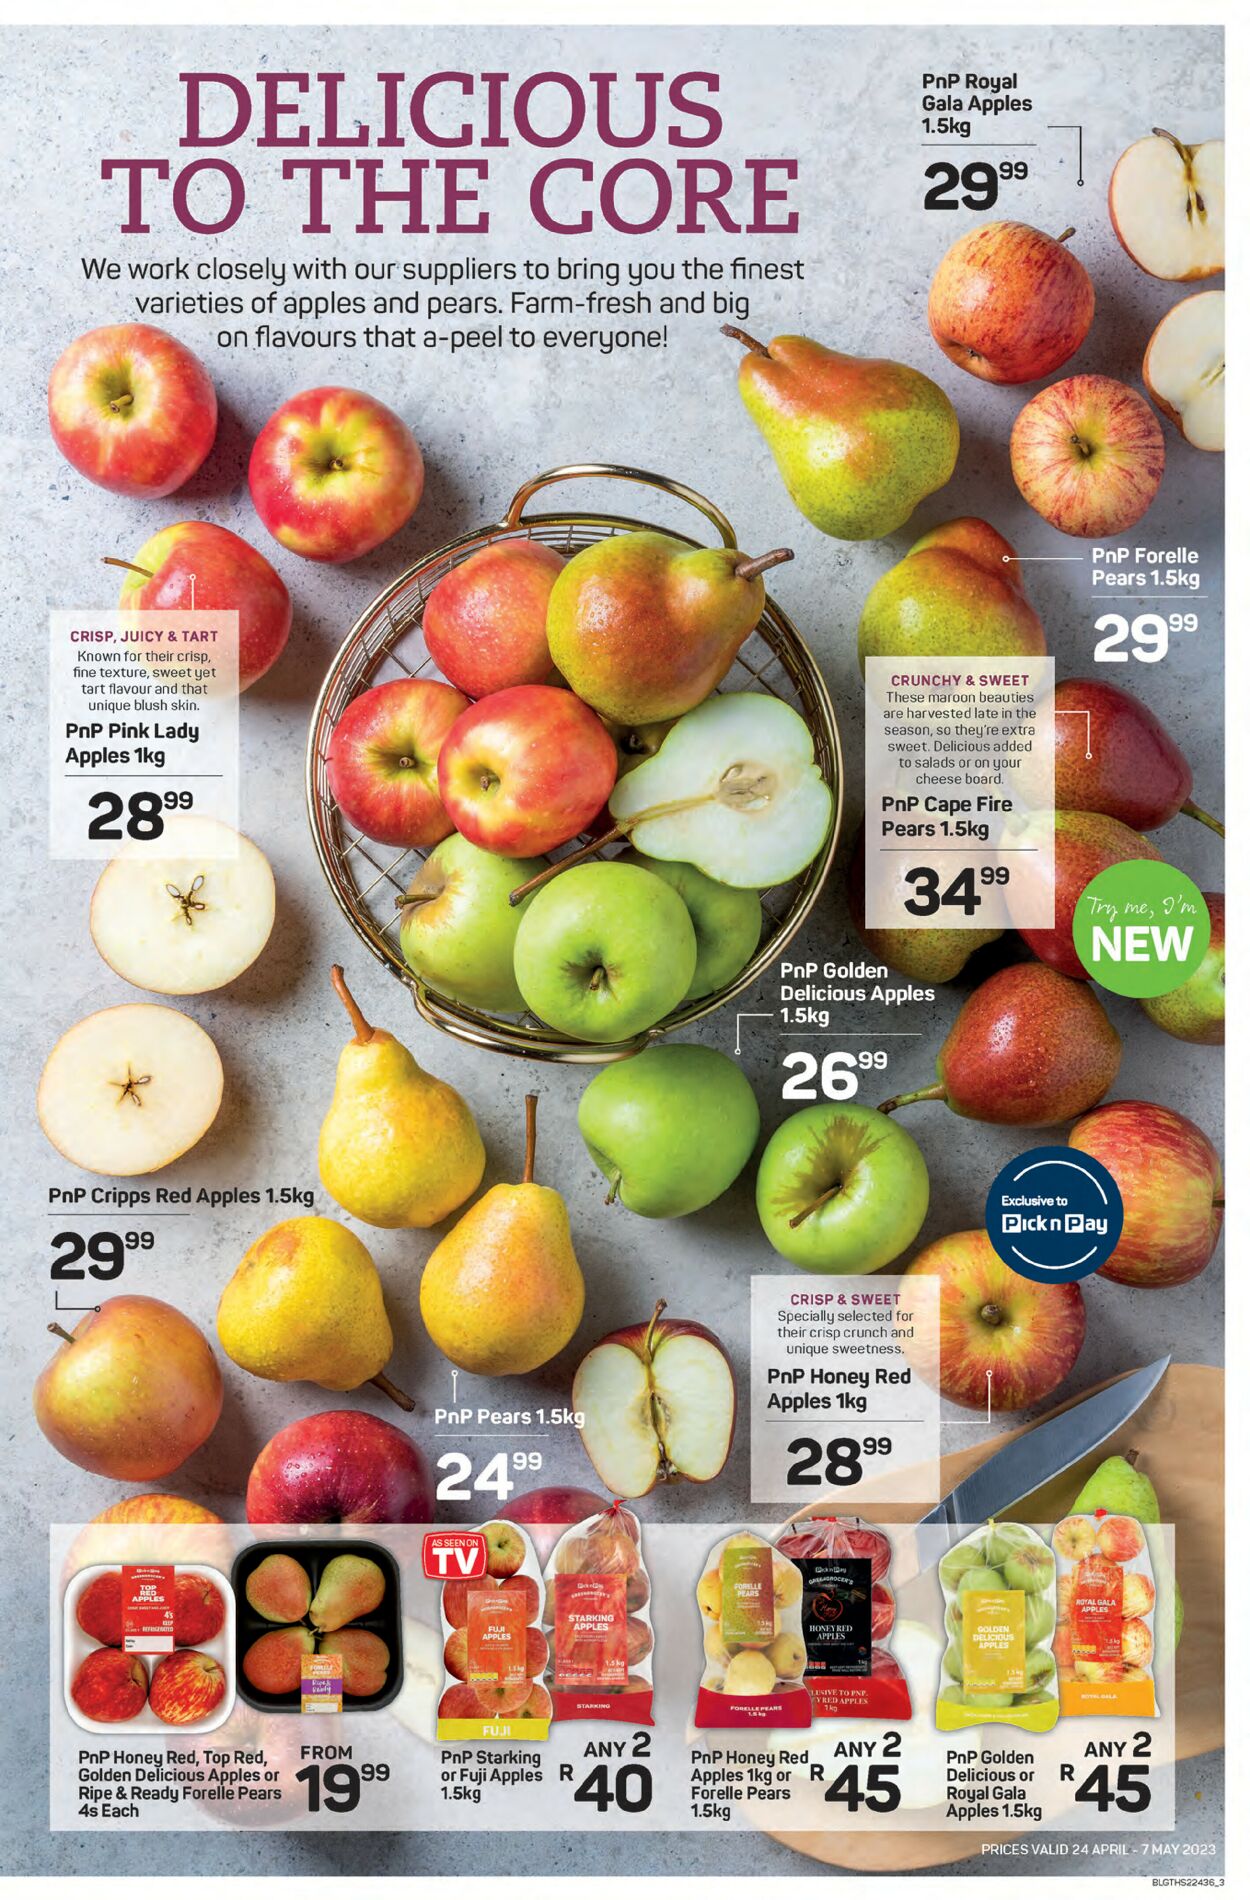 Pick n Pay Catalogue - 2023/04/24-2023/05/07 (Page 3)